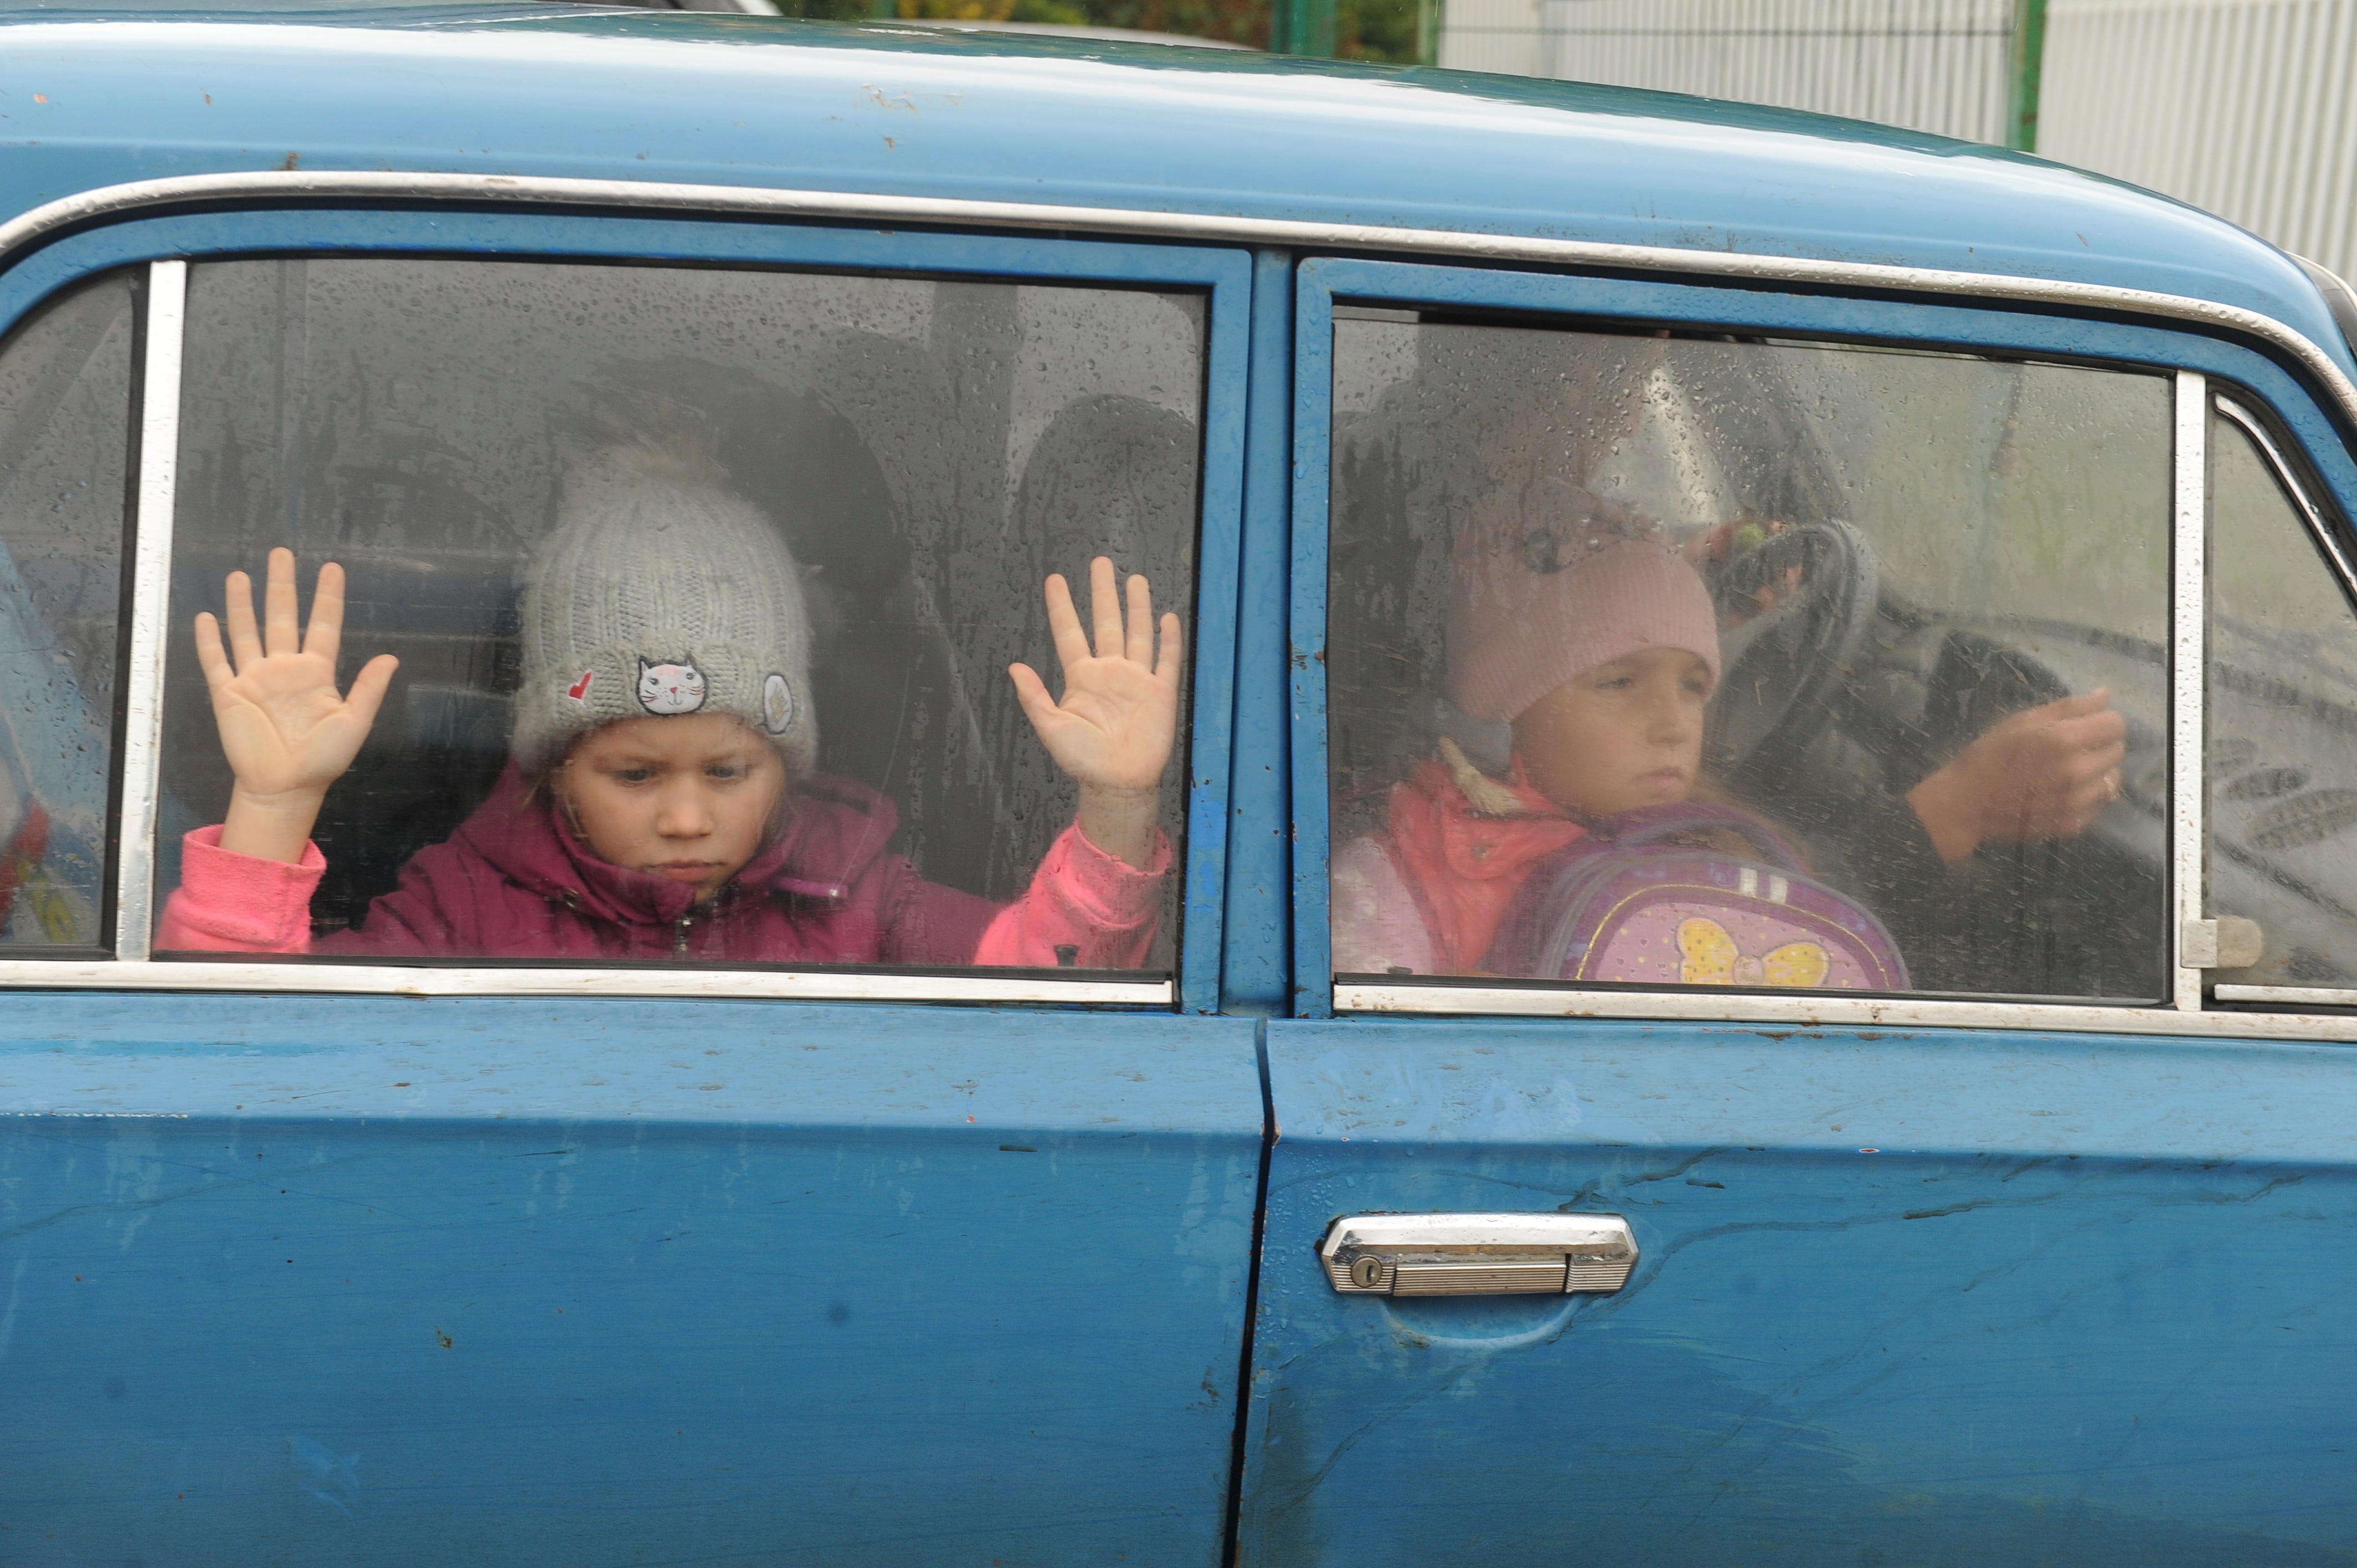 They counted the days until they could return to Ukraine. Now, they're not sure they'll go back